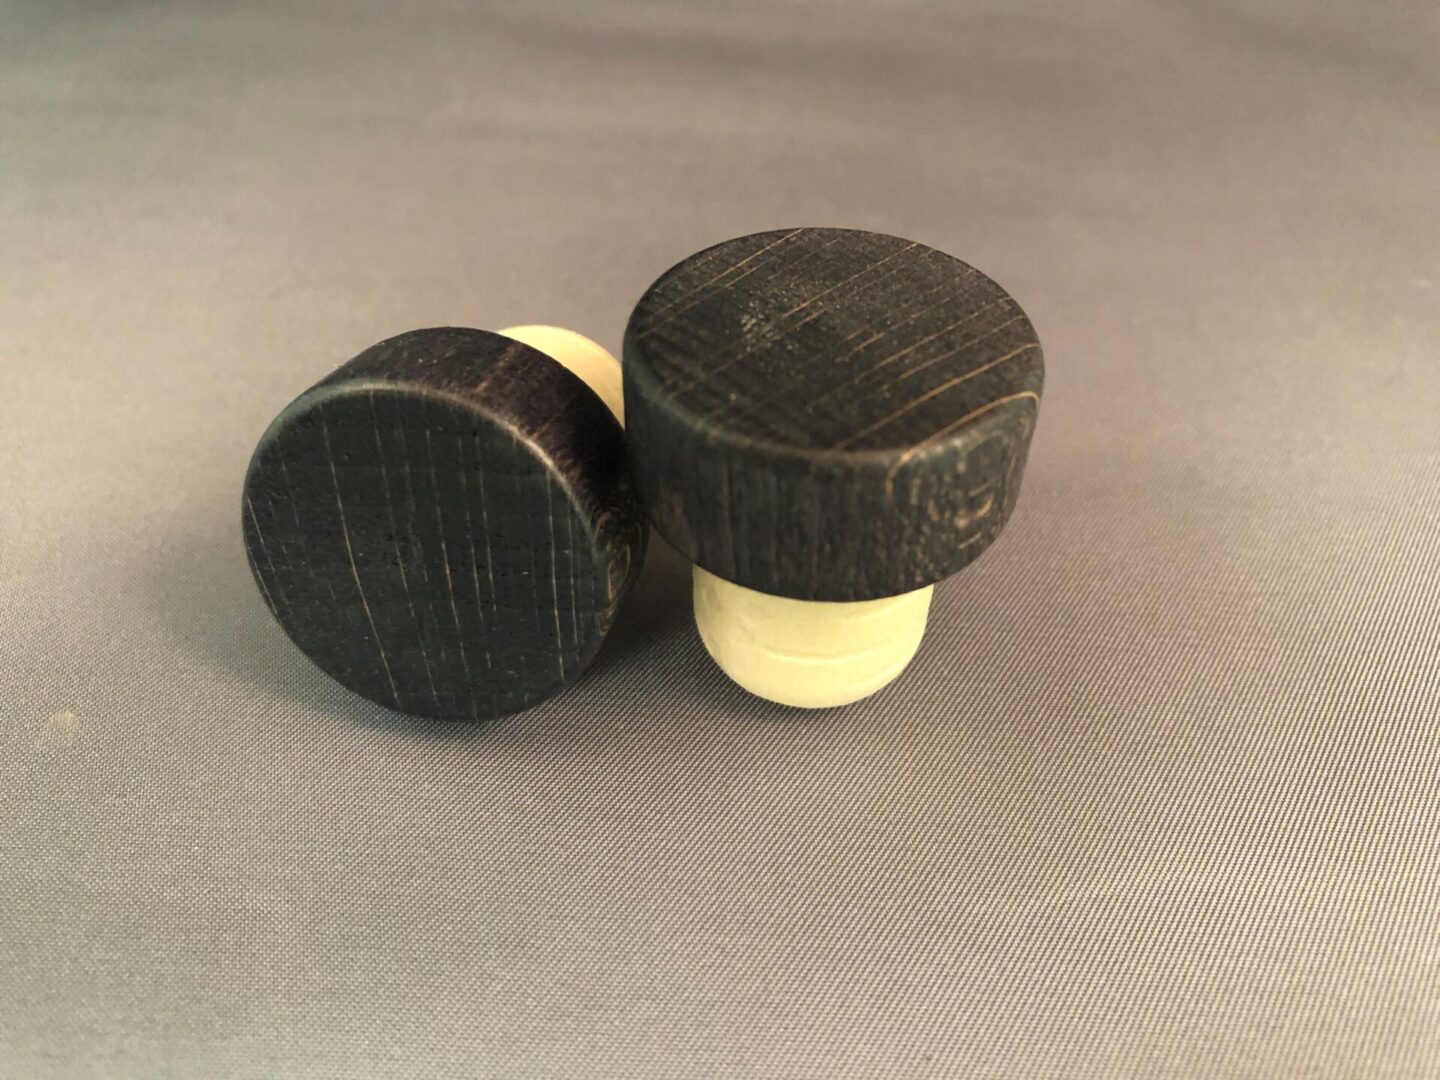 Two Antique Black 29x13/19.5 wine stoppers on a grey surface.